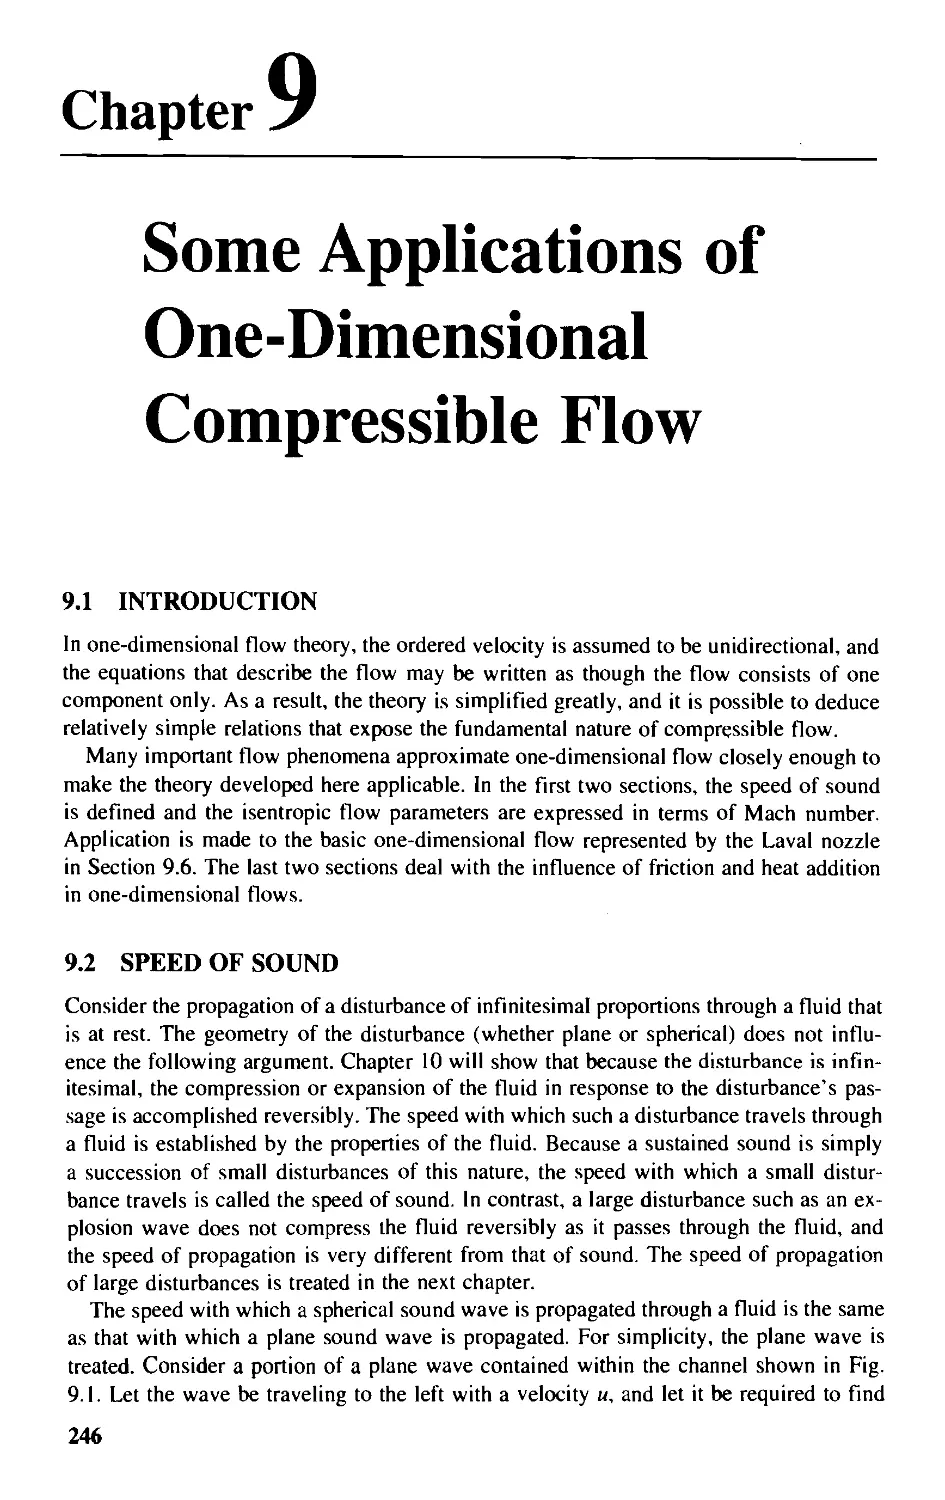 Chapter 9 - Some Applications of 1D Compressible Flow
9.2 - Speed of Sound